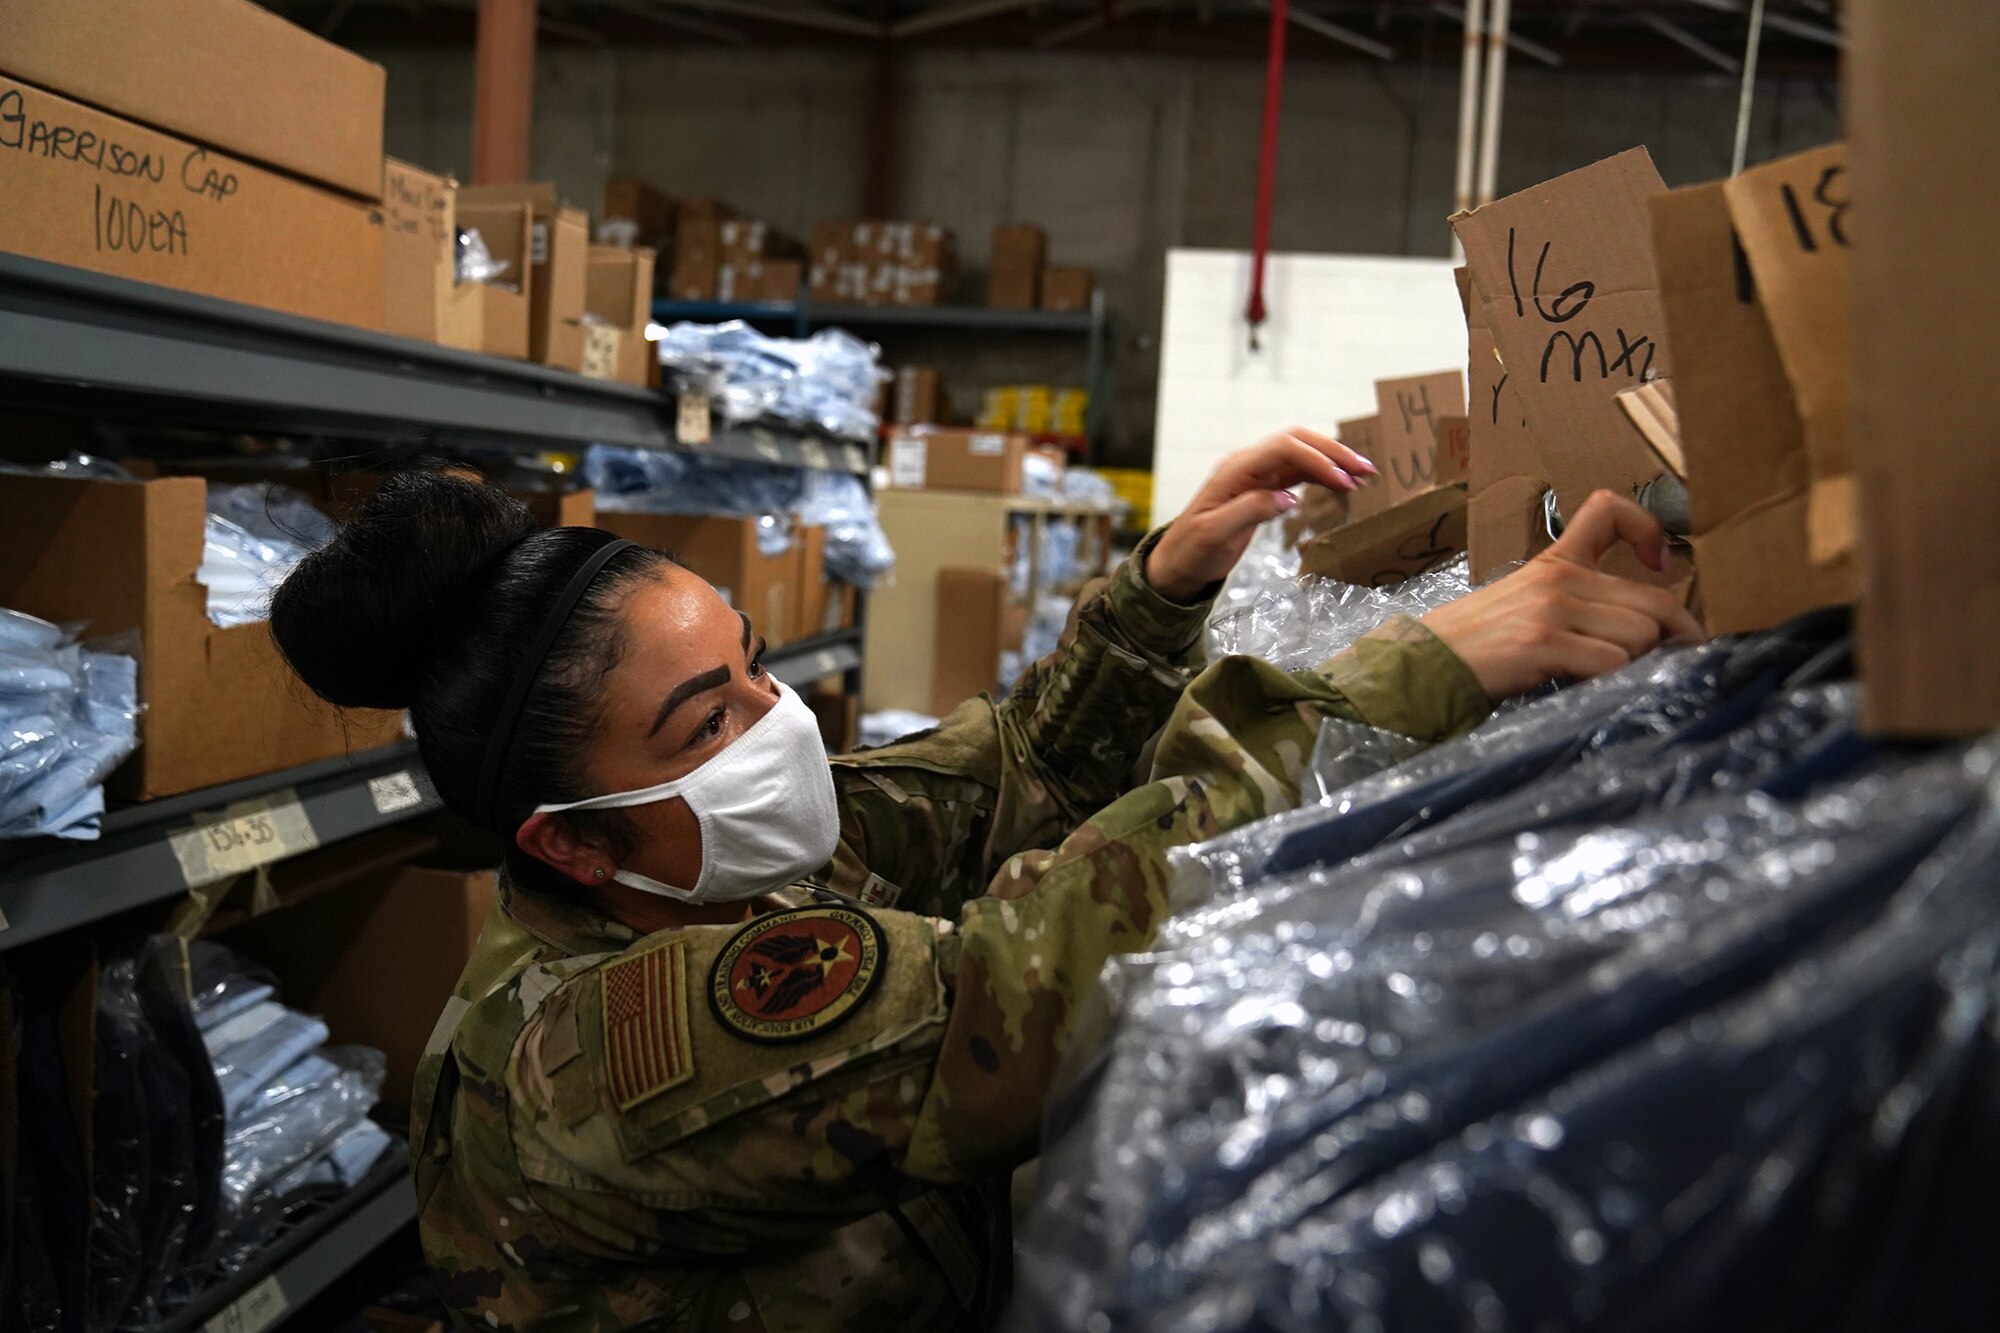 Air Force Master Sgt. Melina Jimerson, basic military training supply lead for the 81st Logistics Readiness Squadron, organizes clothing inside the squadron’s warehouse at Keesler Air Force Base, Mississippi, Aug. 26, 2020. The squadron worked with different Air Education and Training Command units to support basic military training at Keesler by providing uniforms for trainees.